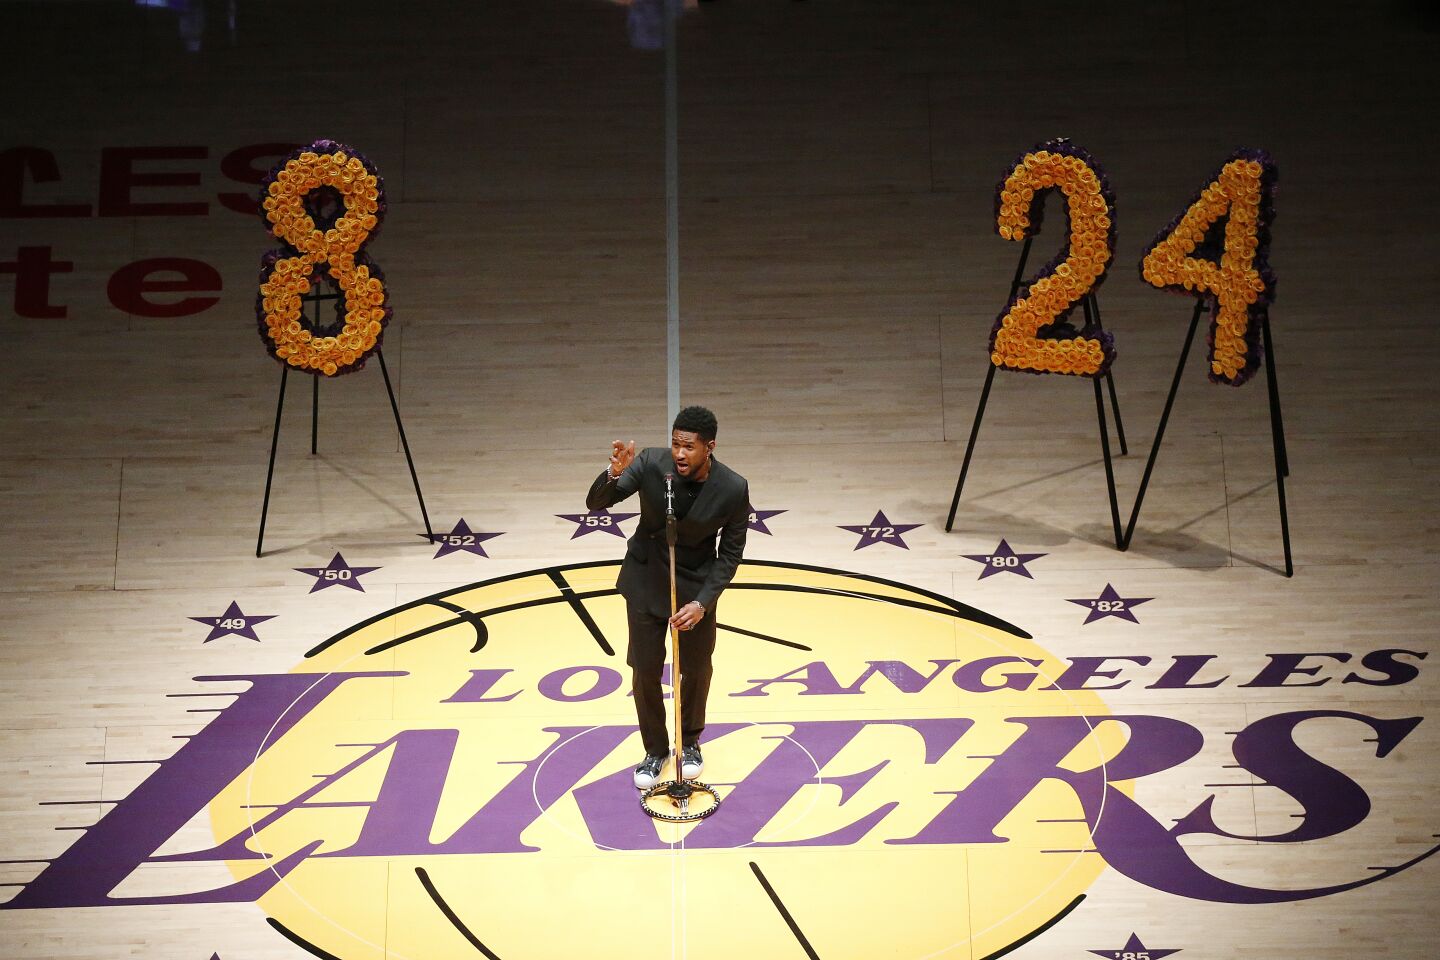 Usher sings "Amazing Grace" during a tribute to Kobe Bryant and the eight others killed in a helicopter crash before a game between the Lakers and Portland Trail Blazers at Staples Center on Jan. 31, 2020.